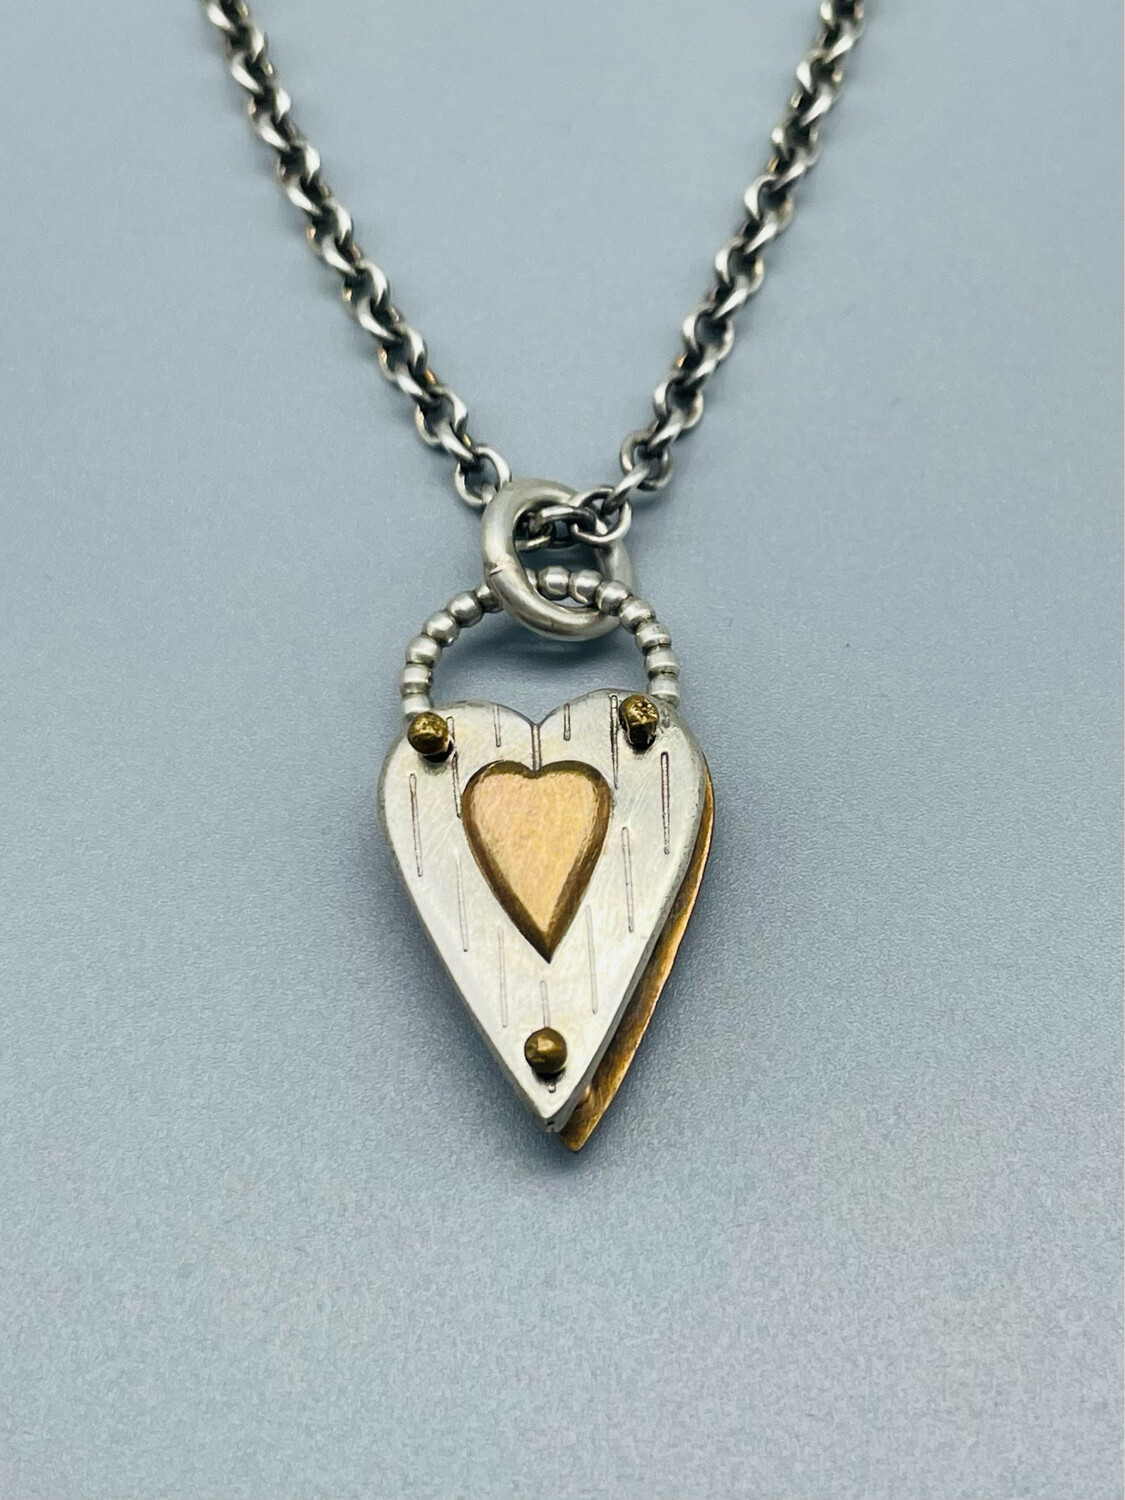 N464 Shadow Heart Necklace, Bronze/Sterling Silver, Thomas Mann, New Orleans, LA